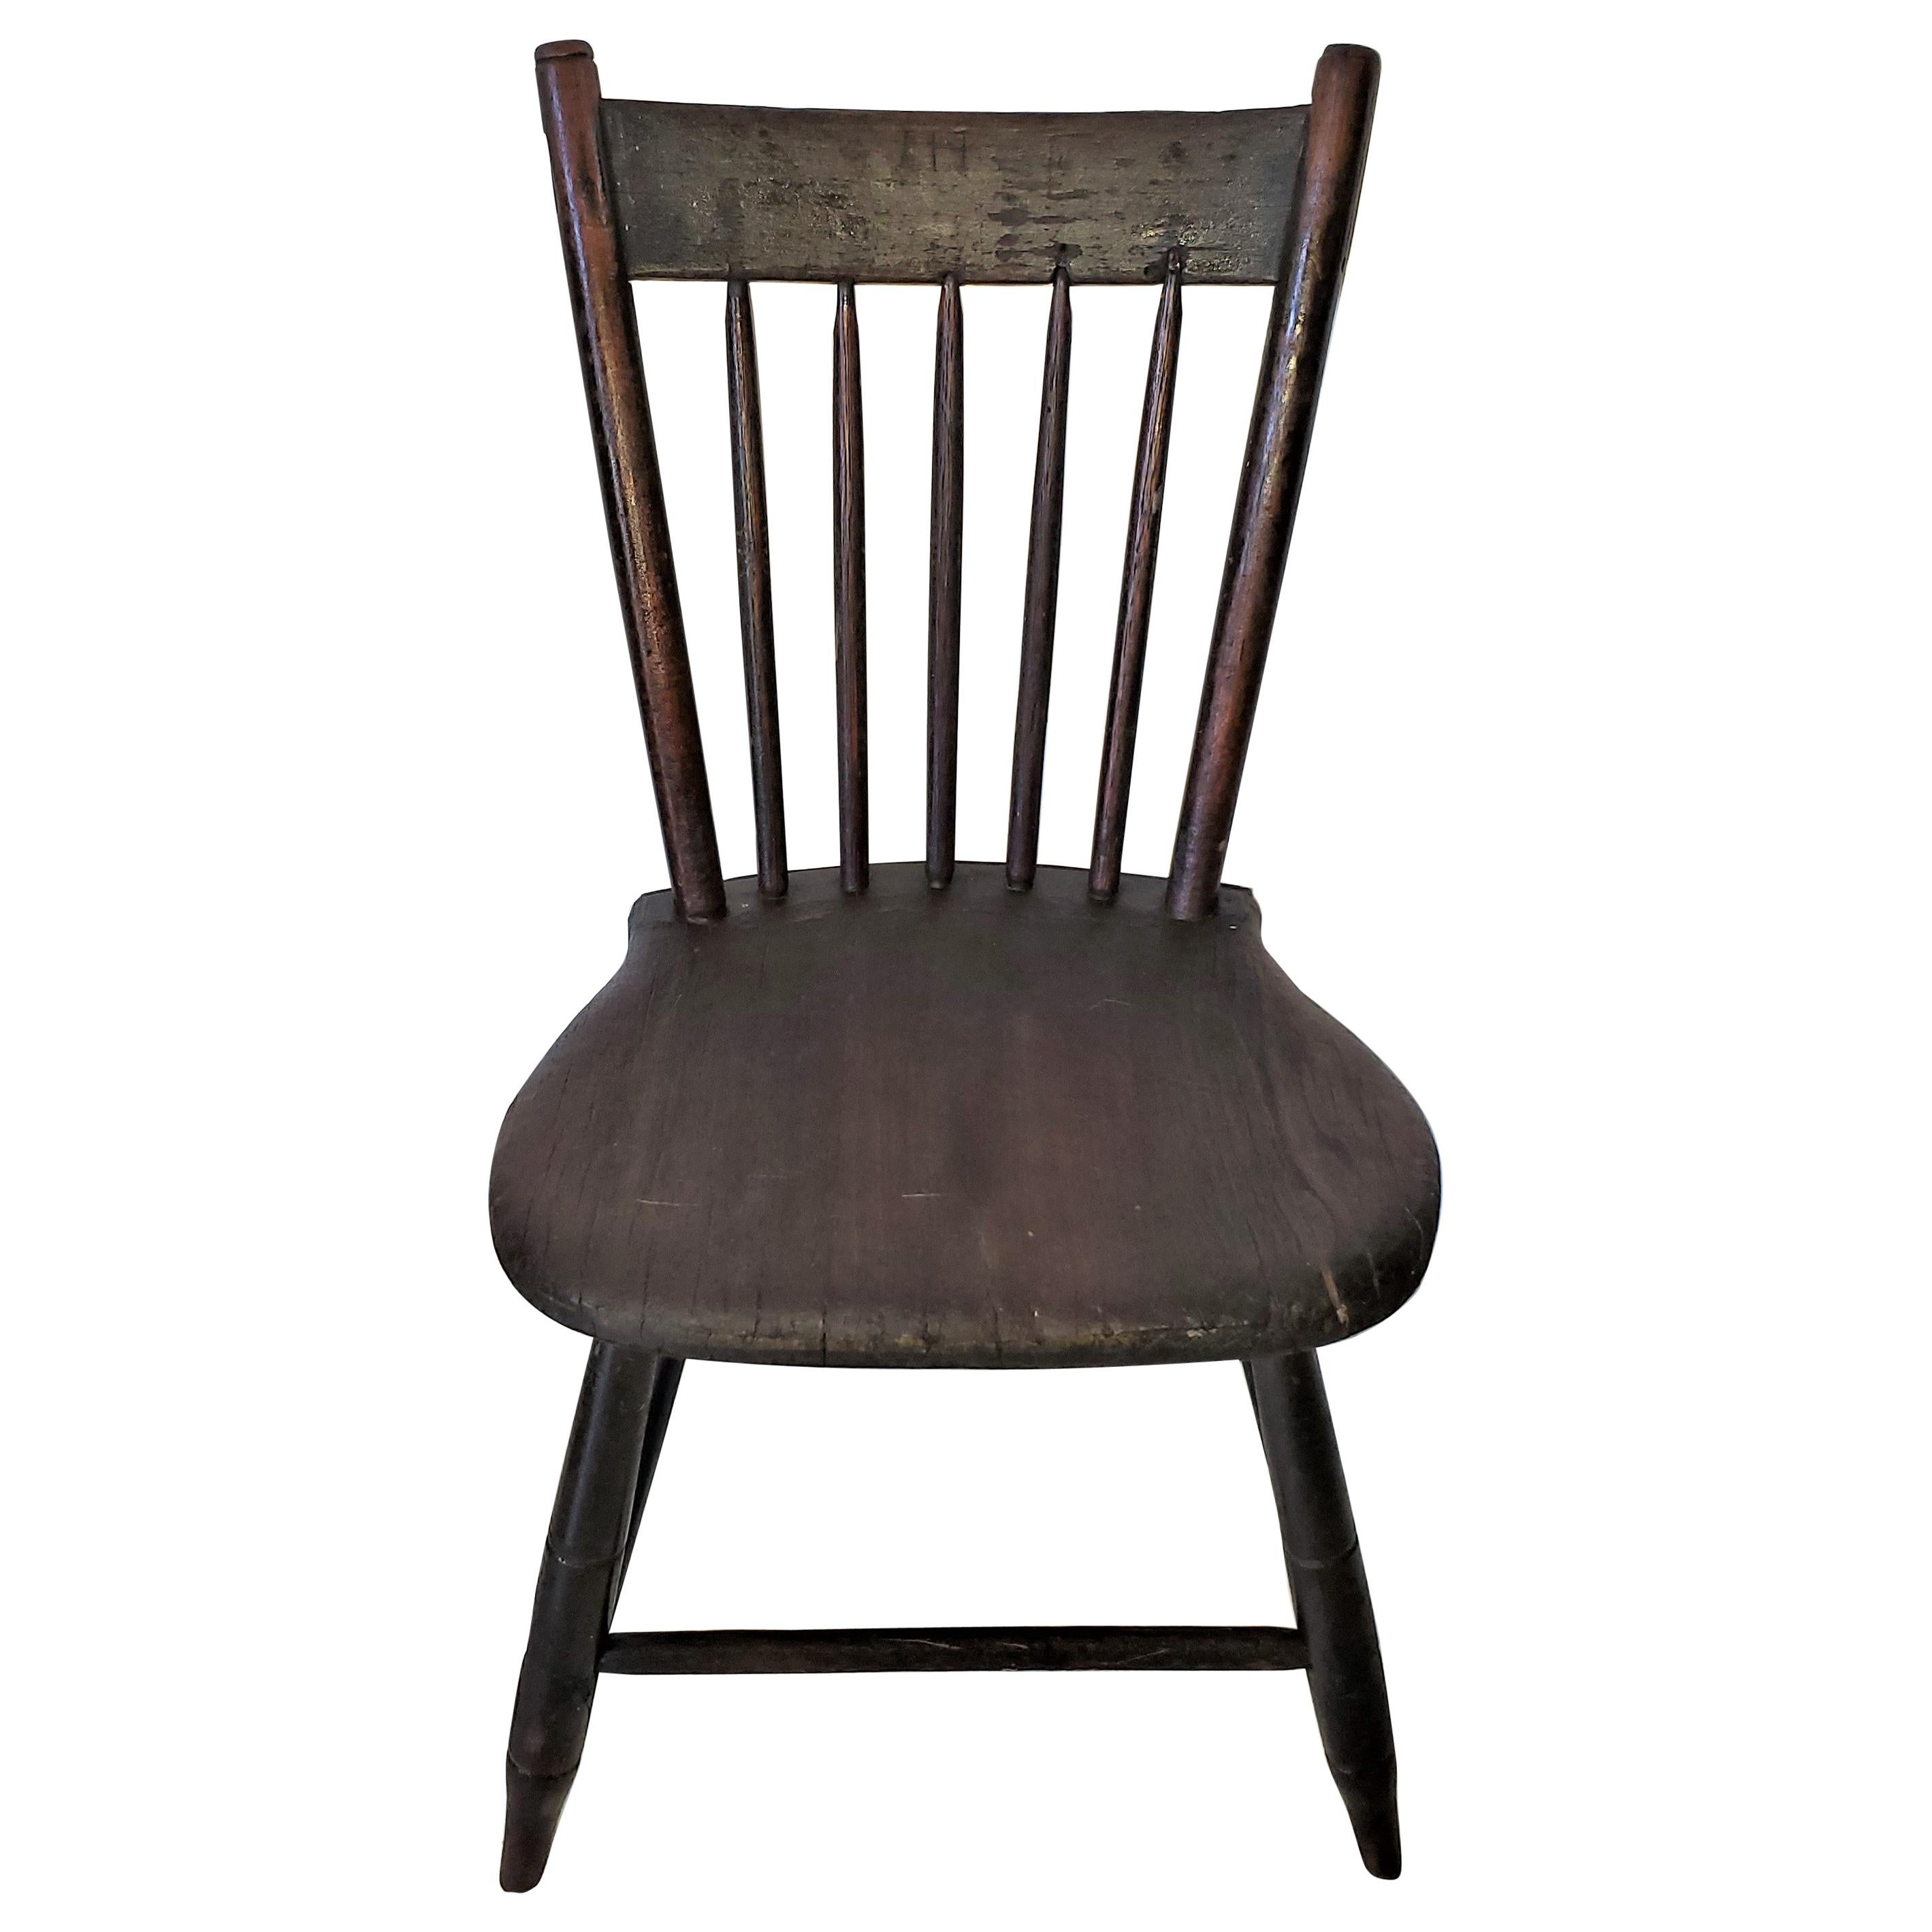 19th Century American Walnut Childs Chair with Provenance